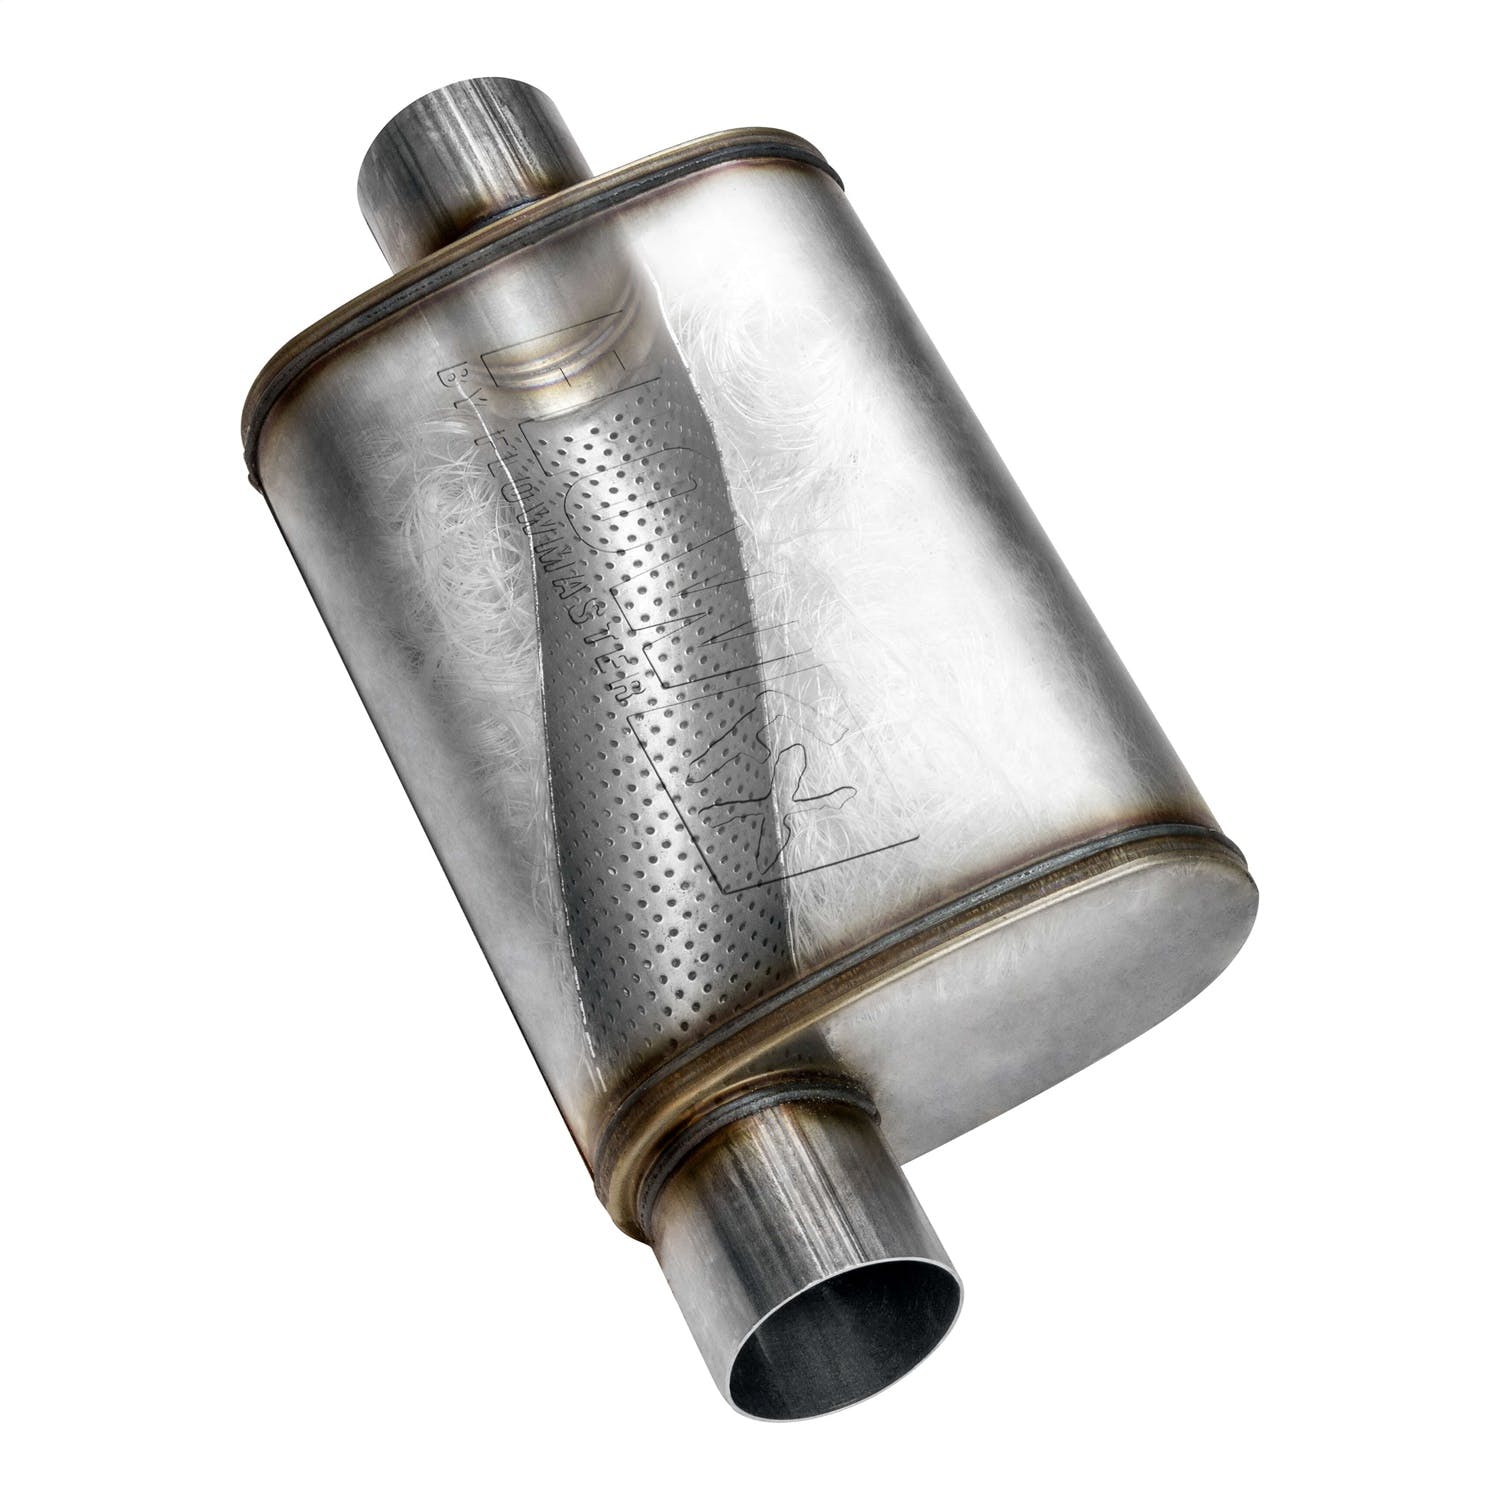 Flowmaster 71225 Flow FX Series Muffler 2.5 in in/out